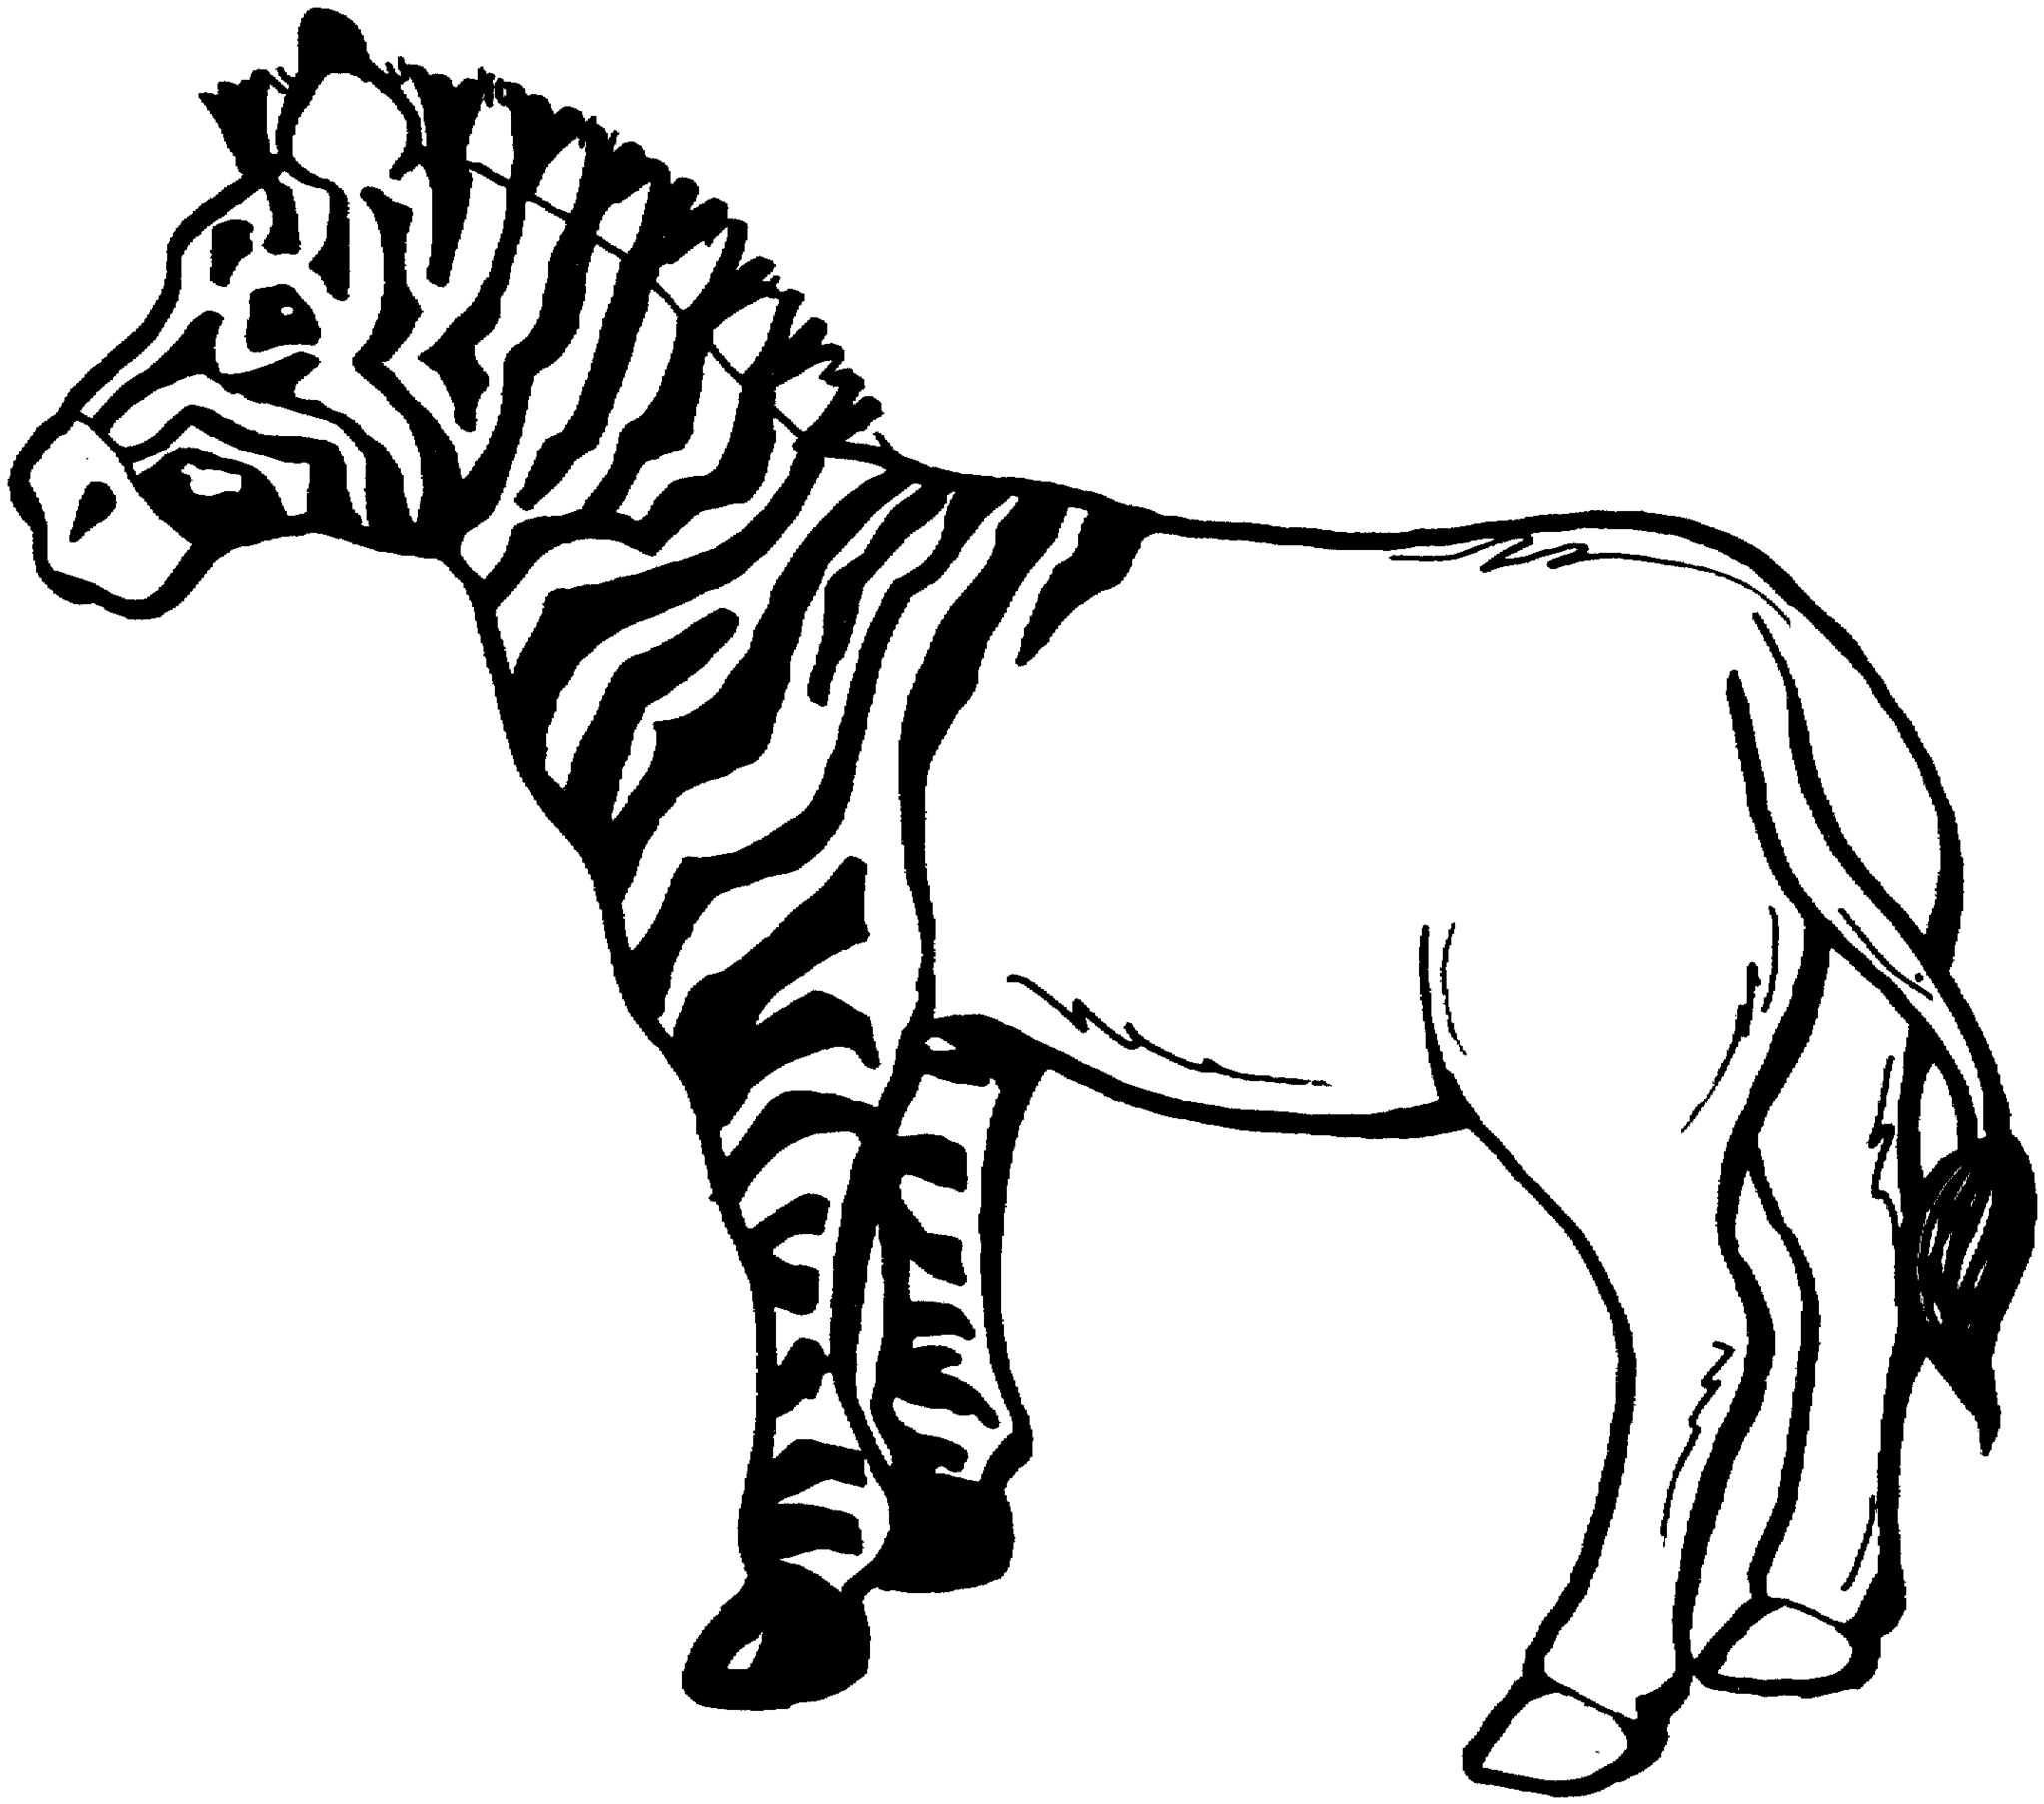 Zebra line drawing clipart free to use clip art resource